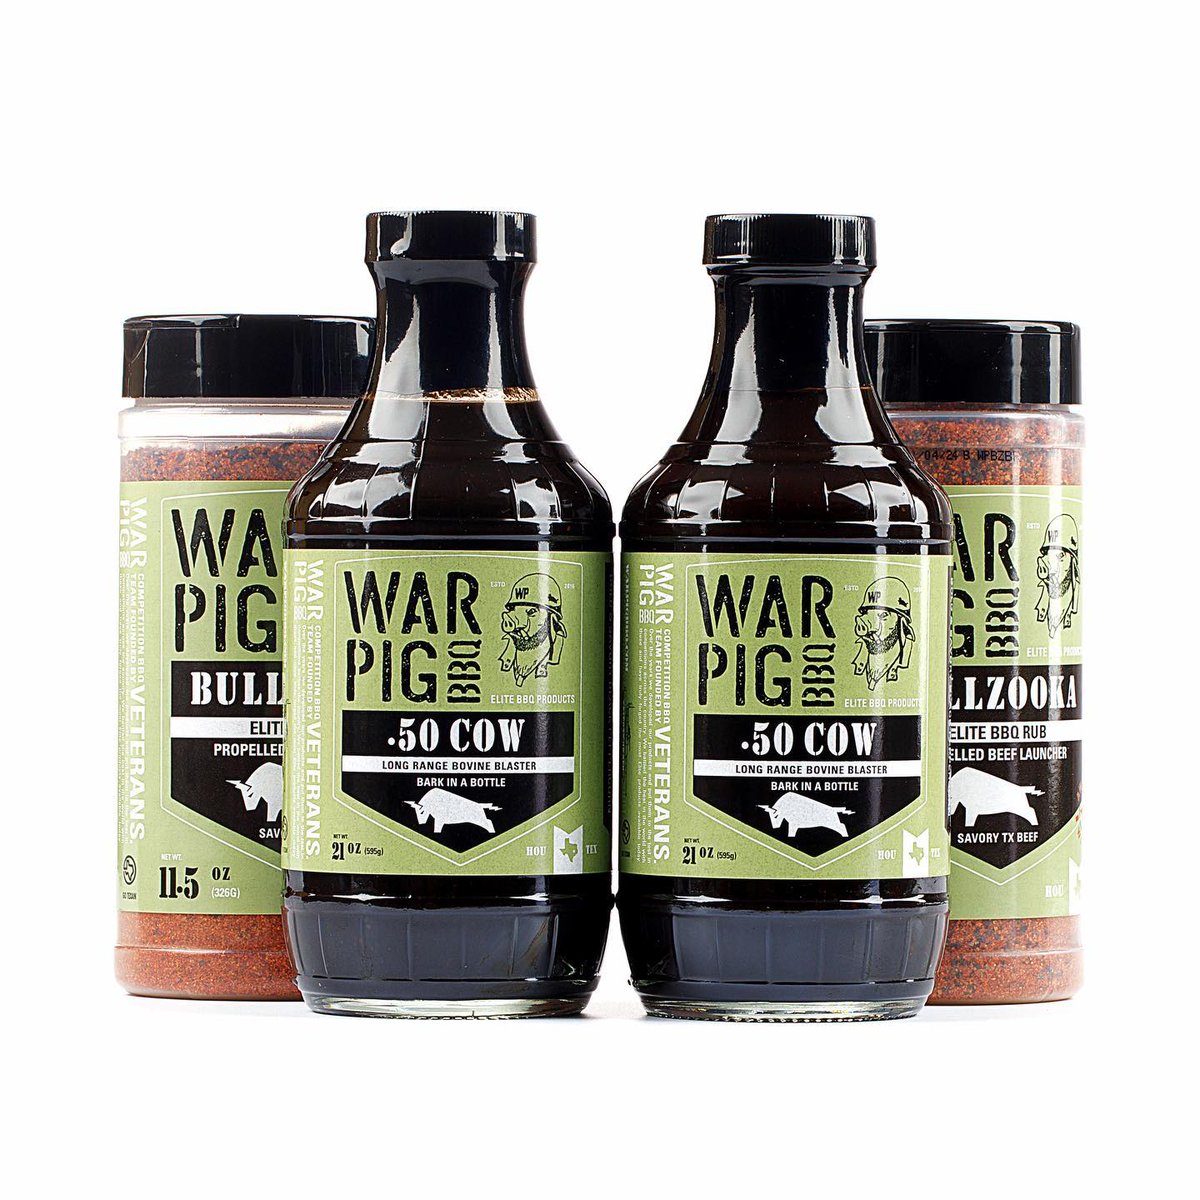 The ultimate combo for your Beef! Go to @HEB and give @warpigbbq a try. 🤤🤤🤤 #partnership #supportingveterans